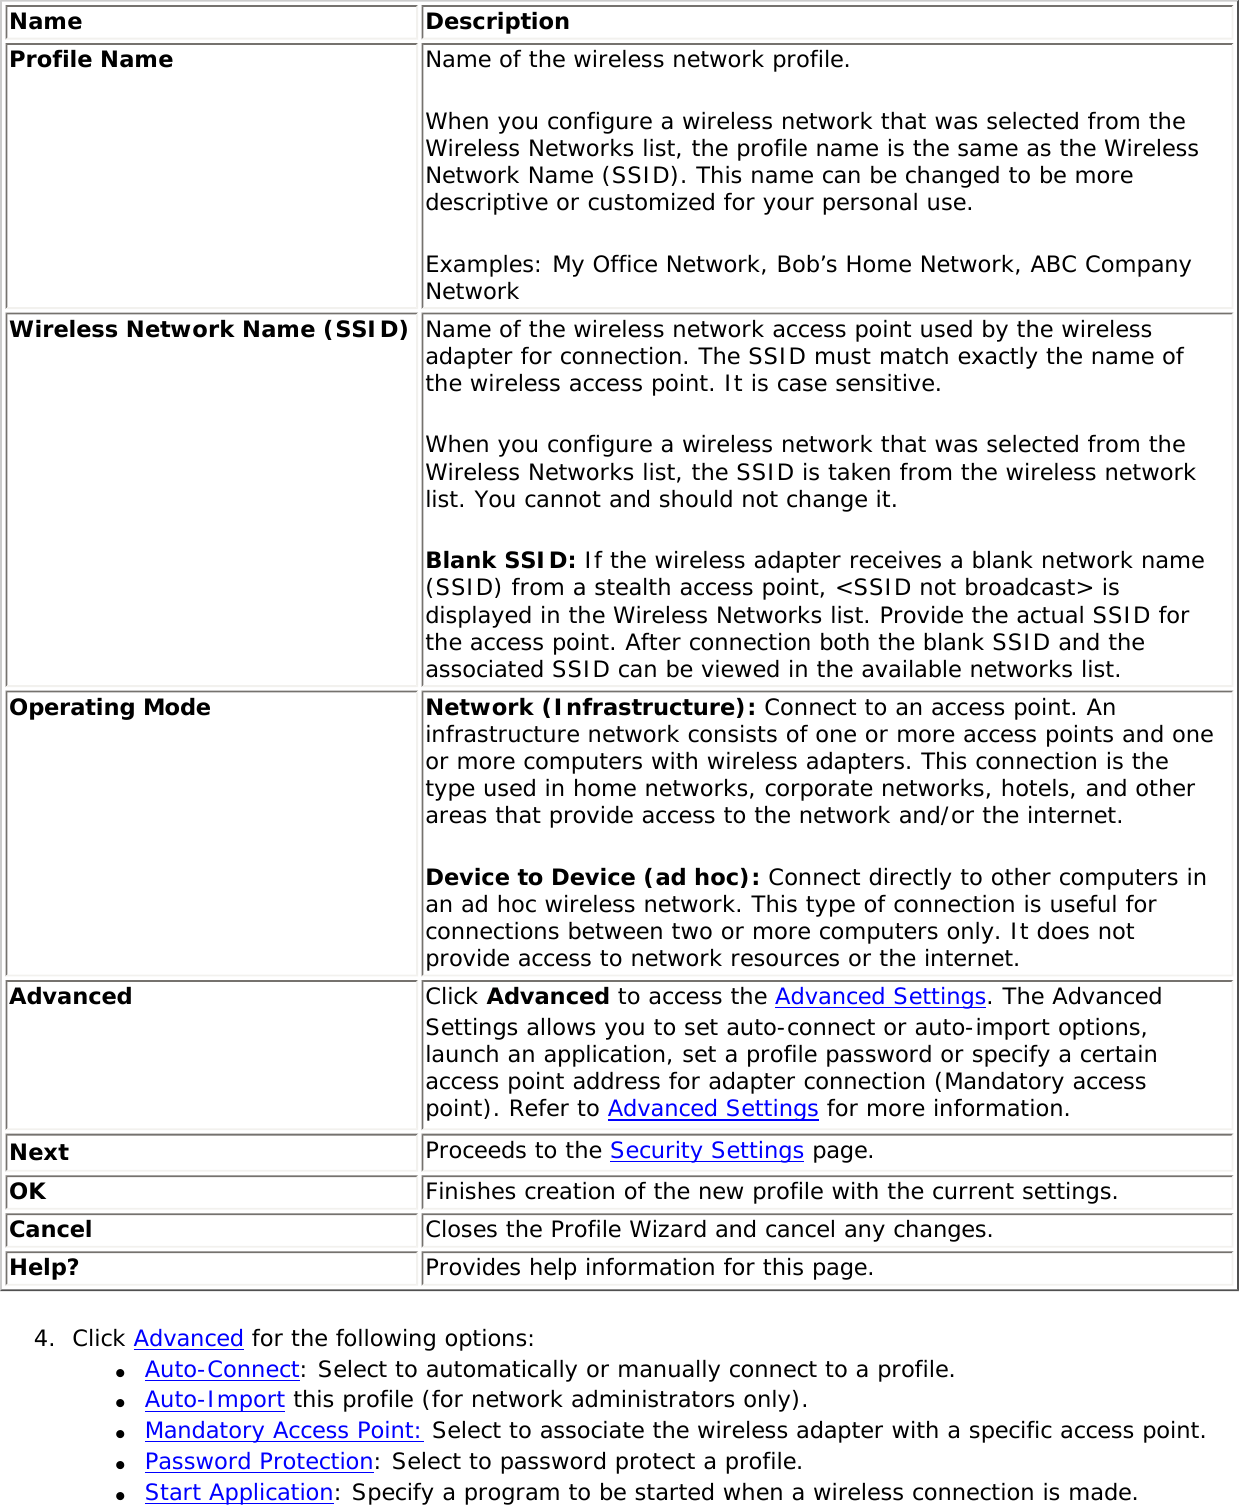 Name DescriptionProfile Name Name of the wireless network profile. When you configure a wireless network that was selected from the Wireless Networks list, the profile name is the same as the Wireless Network Name (SSID). This name can be changed to be more descriptive or customized for your personal use. Examples: My Office Network, Bob’s Home Network, ABC Company NetworkWireless Network Name (SSID) Name of the wireless network access point used by the wireless adapter for connection. The SSID must match exactly the name of the wireless access point. It is case sensitive. When you configure a wireless network that was selected from the Wireless Networks list, the SSID is taken from the wireless network list. You cannot and should not change it. Blank SSID: If the wireless adapter receives a blank network name (SSID) from a stealth access point, &lt;SSID not broadcast&gt; is displayed in the Wireless Networks list. Provide the actual SSID for the access point. After connection both the blank SSID and the associated SSID can be viewed in the available networks list.Operating Mode Network (Infrastructure): Connect to an access point. An infrastructure network consists of one or more access points and one or more computers with wireless adapters. This connection is the type used in home networks, corporate networks, hotels, and other areas that provide access to the network and/or the internet. Device to Device (ad hoc): Connect directly to other computers in an ad hoc wireless network. This type of connection is useful for connections between two or more computers only. It does not provide access to network resources or the internet.Advanced  Click Advanced to access the Advanced Settings. The Advanced Settings allows you to set auto-connect or auto-import options, launch an application, set a profile password or specify a certain access point address for adapter connection (Mandatory access point). Refer to Advanced Settings for more information.Next Proceeds to the Security Settings page.OK Finishes creation of the new profile with the current settings.Cancel  Closes the Profile Wizard and cancel any changes.Help? Provides help information for this page.4.  Click Advanced for the following options:●     Auto-Connect: Select to automatically or manually connect to a profile. ●     Auto-Import this profile (for network administrators only).●     Mandatory Access Point: Select to associate the wireless adapter with a specific access point. ●     Password Protection: Select to password protect a profile. ●     Start Application: Specify a program to be started when a wireless connection is made. 